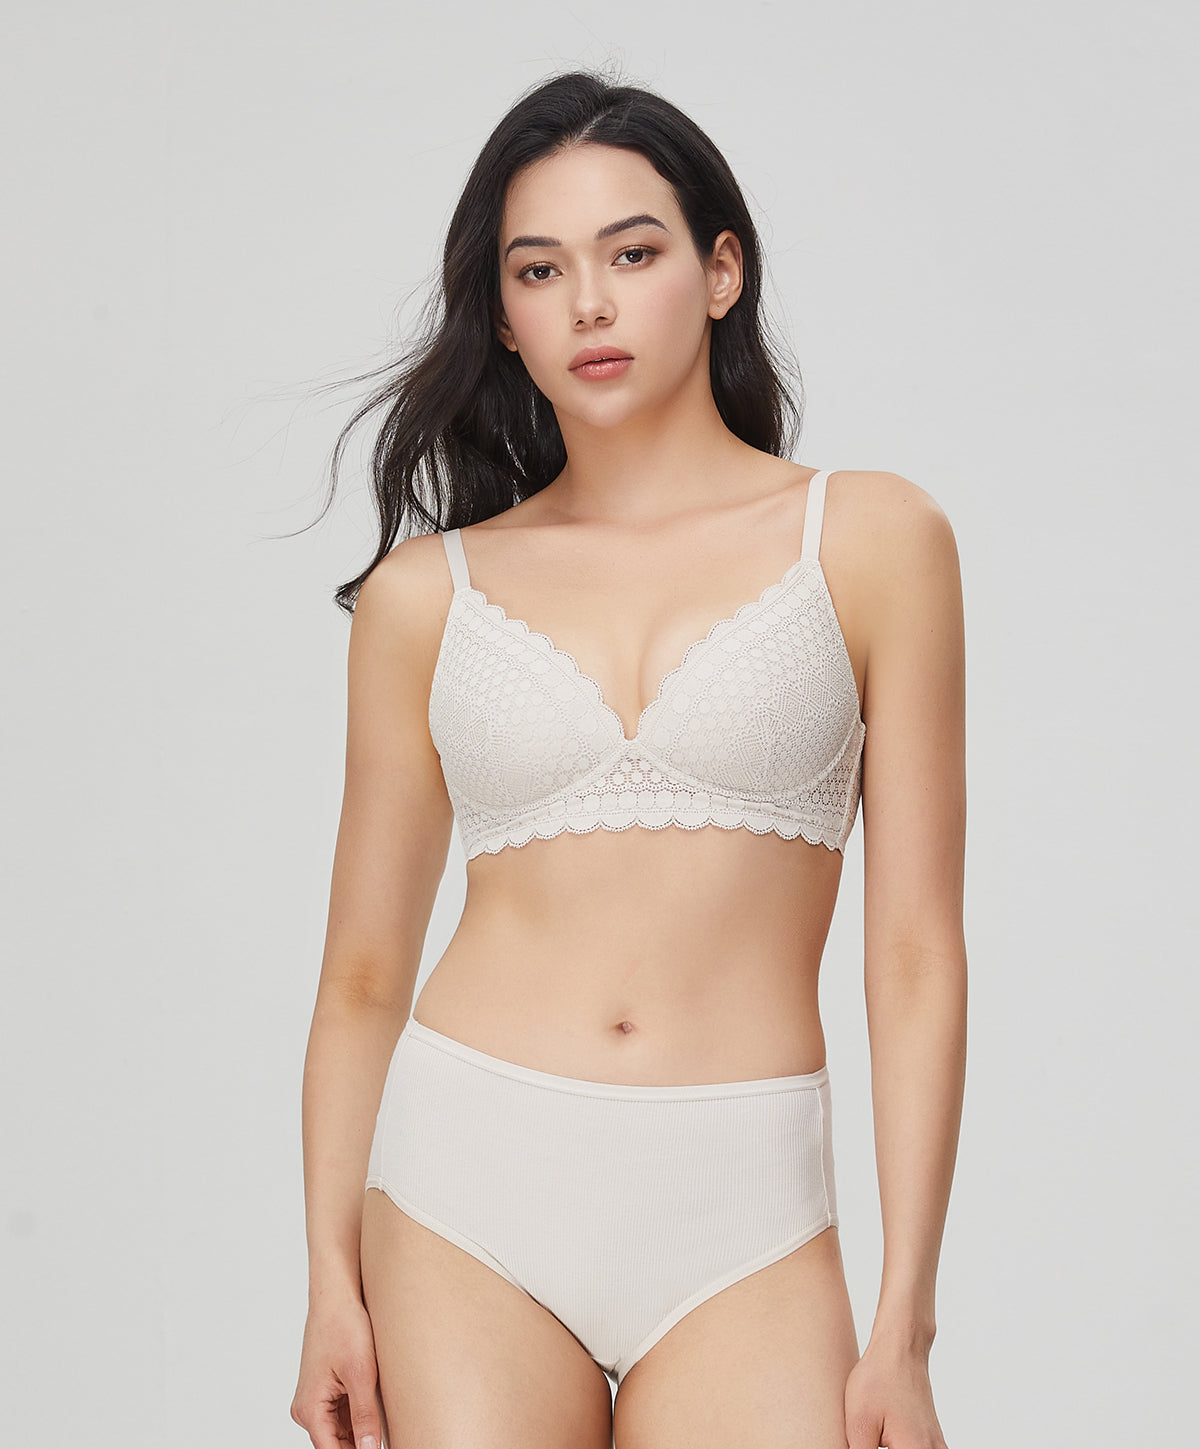 Pierre Cardin Lingerie Malaysia - Women should be well versed with  different types of bra available in the market for them to make decision  that match their outfits. Having the right bra